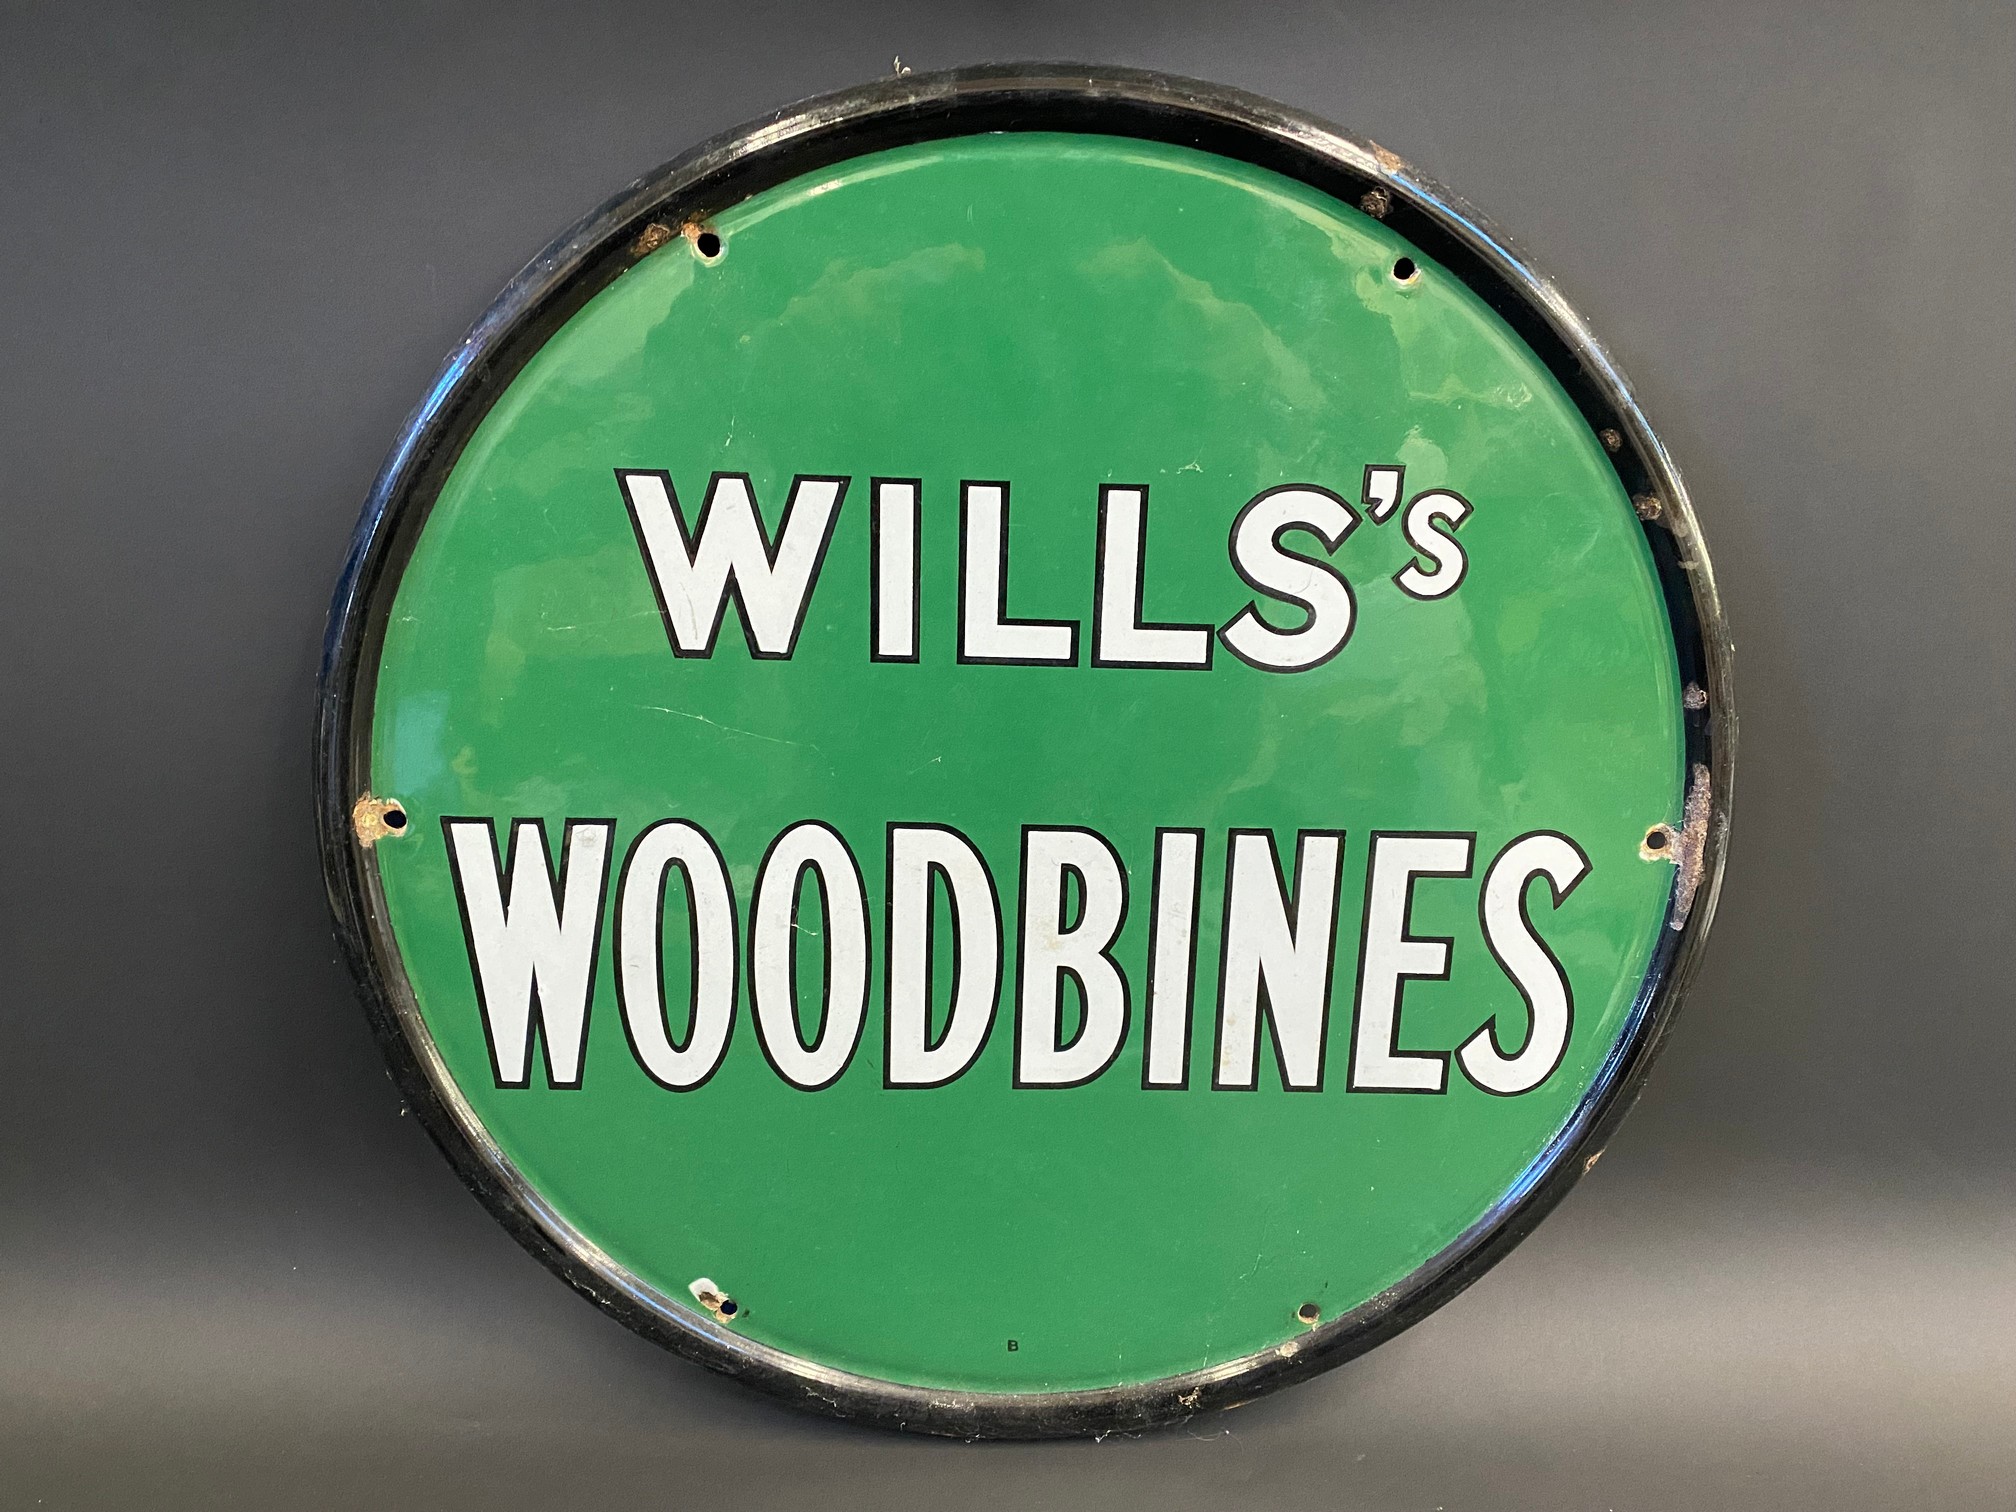 A Wills's Woodbines circular enamel sign in good condition, with a nice gloss, 18" diameter.